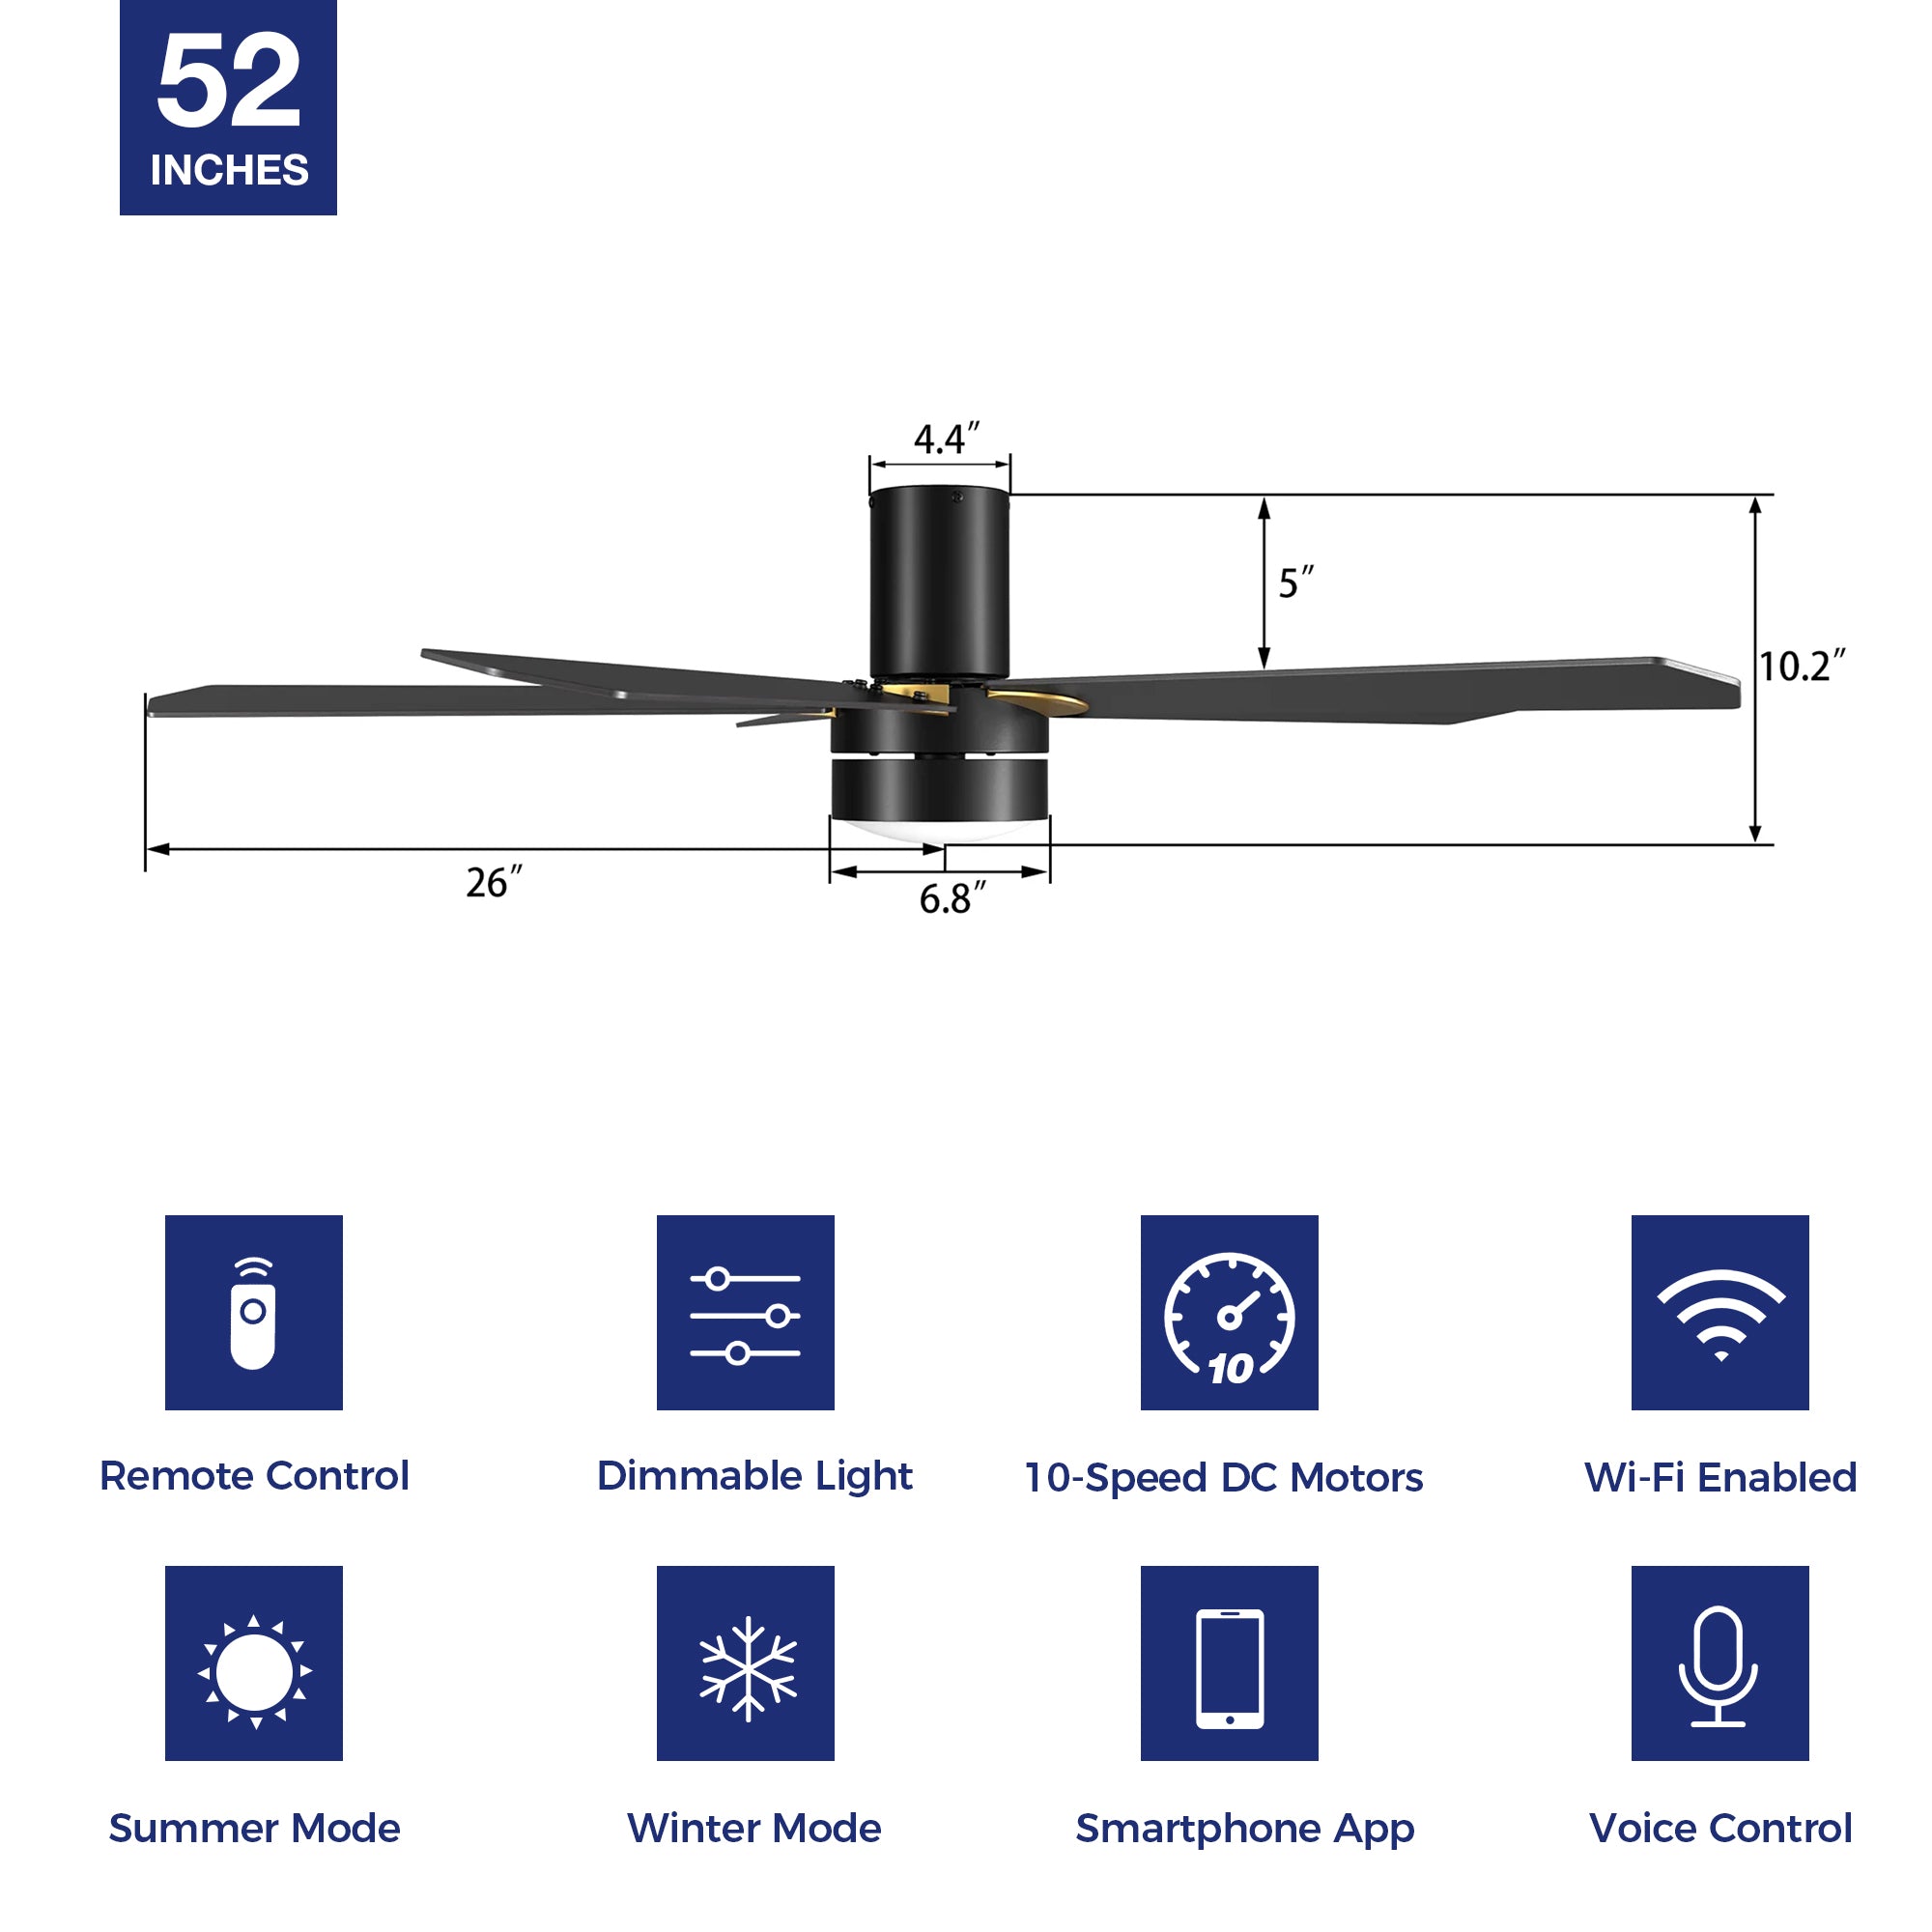 This Harlem 52&quot; smart ceiling fan keeps your space cool, bright, and stylish. It is a soft modern masterpiece perfect for your large indoor living spaces. This Wifi smart ceiling fan is a simplicity designing with Black finish, use elegant Plywood blades and has an integrated 4000K LED cool light. The fan features Remote control, Wi-Fi apps, Siri Shortcut and Voice control technology (compatible with Amazon Alexa and Google Home Assistant ) to set fan preferences.